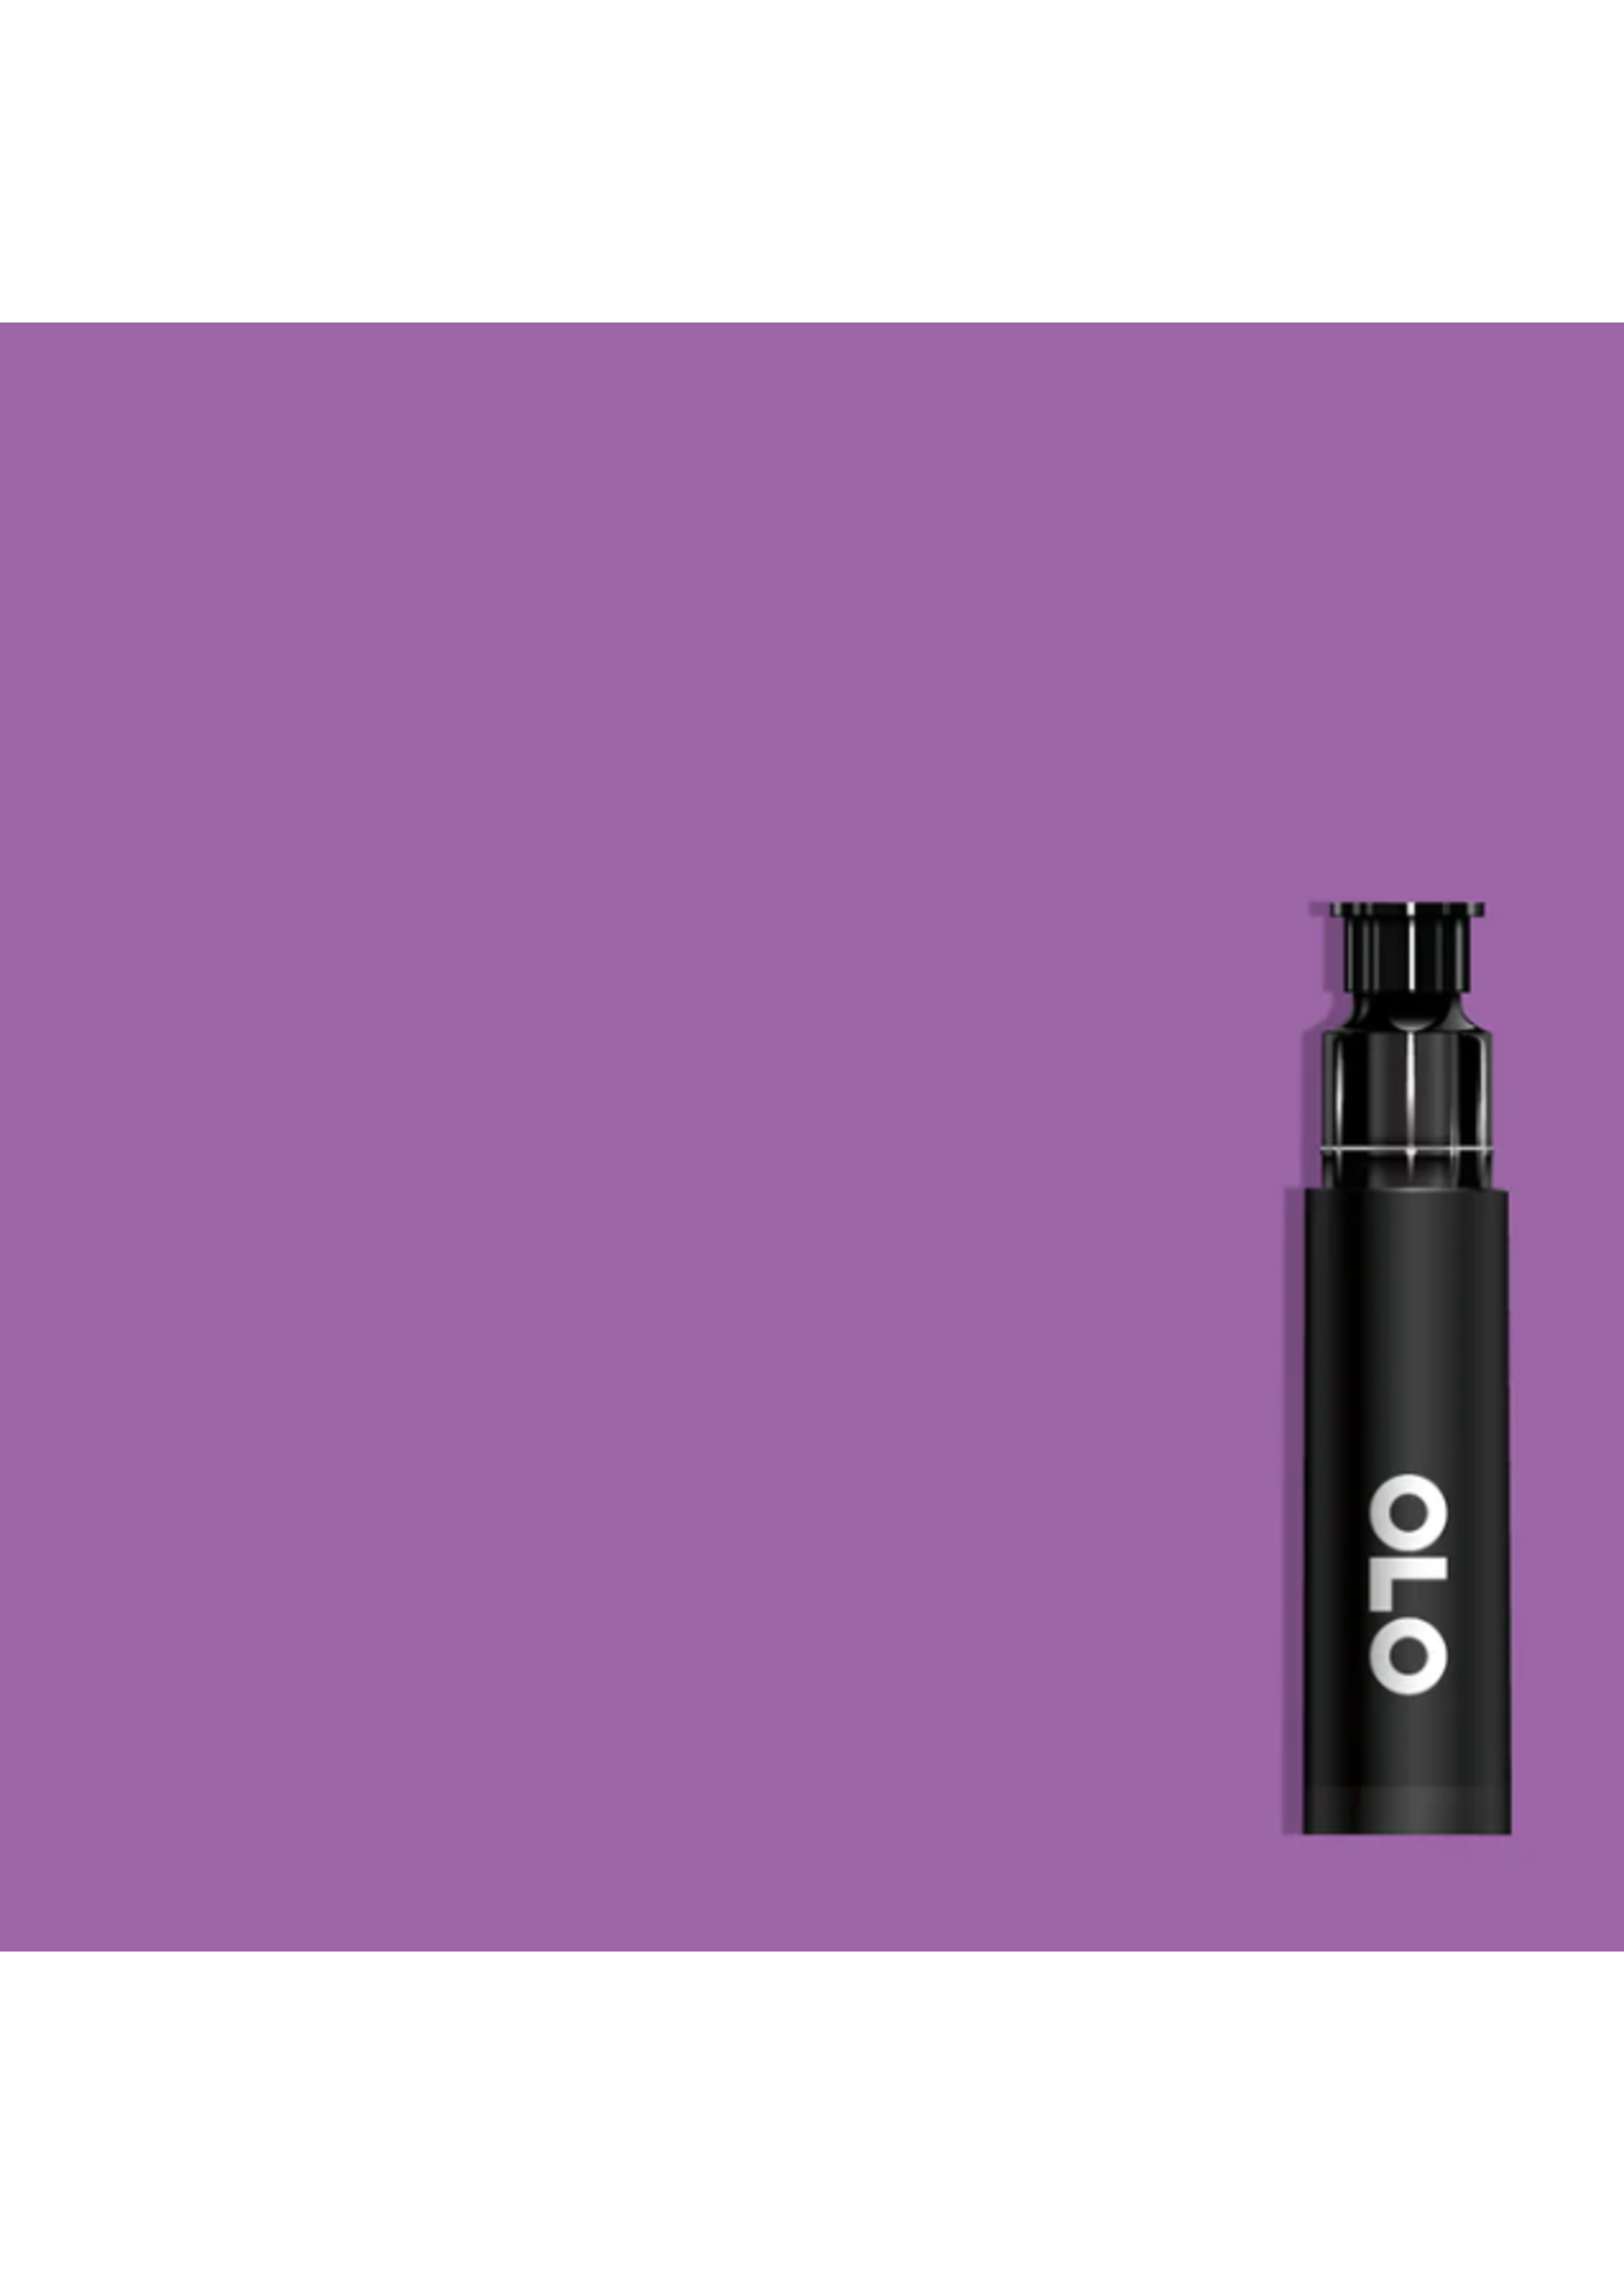 OLO OLO Brush Replacement Cartridge: Beautyberry